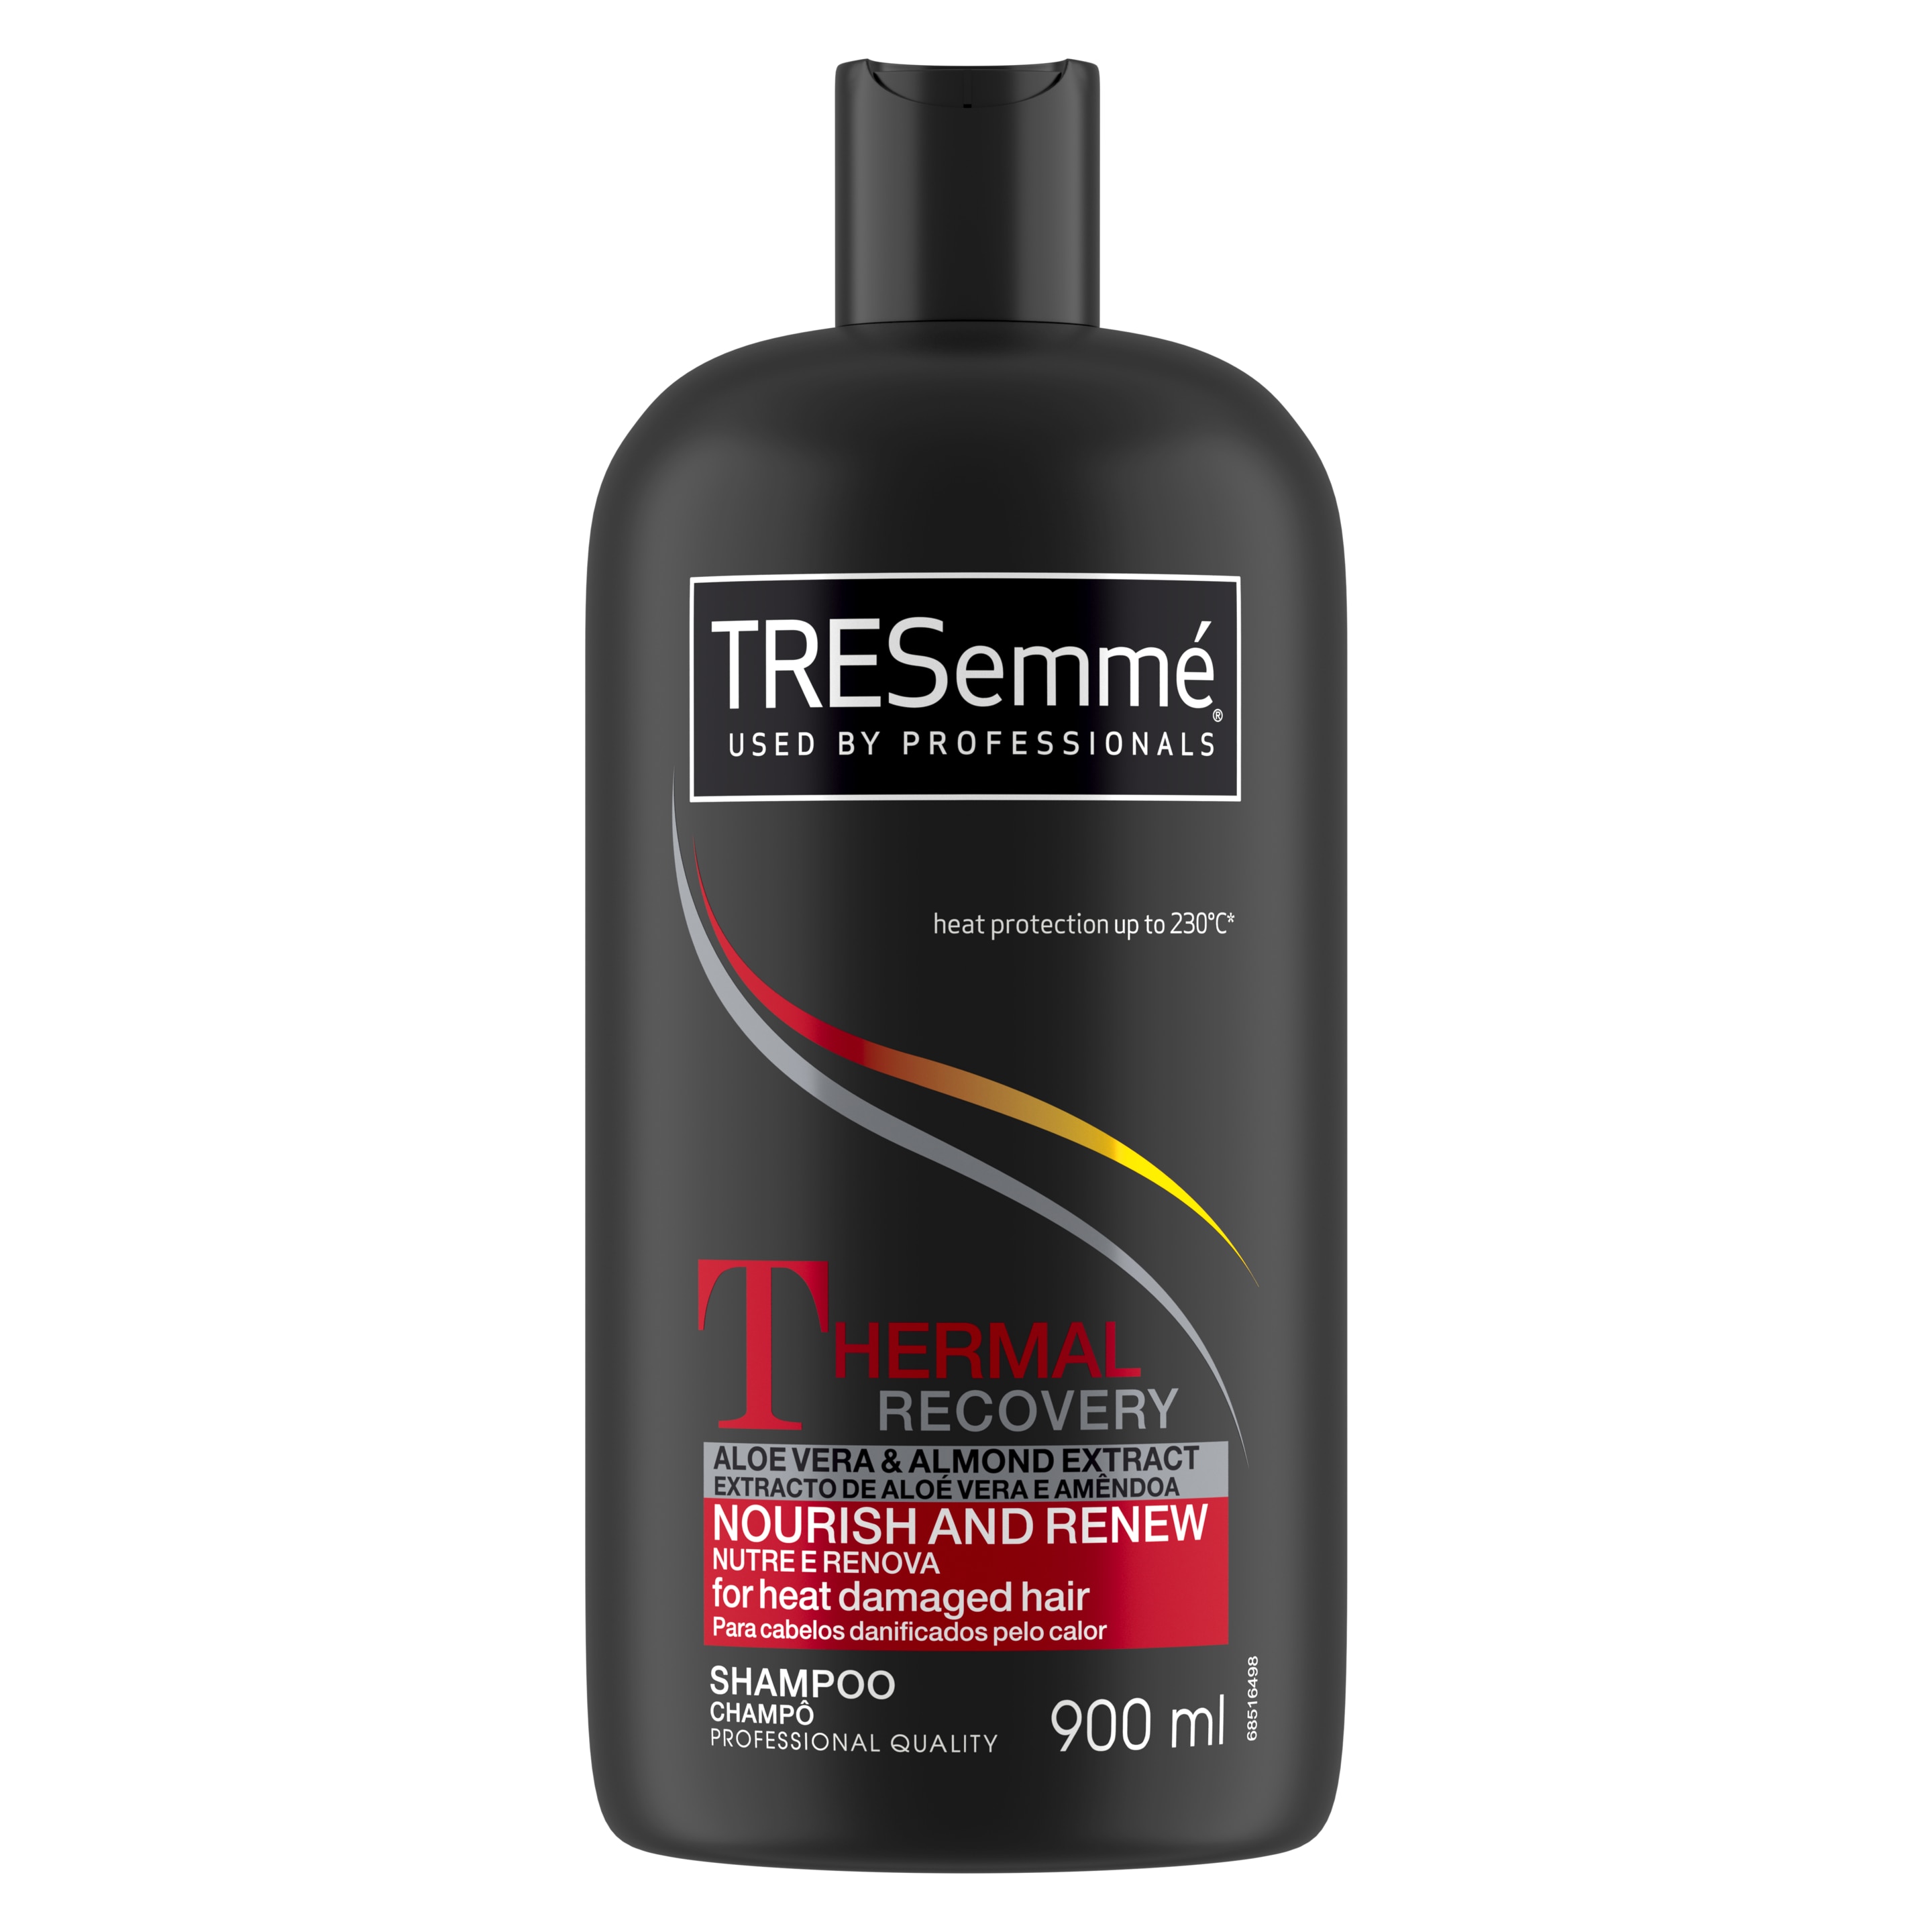 TRESemmé Thermal Recovery Shampoo  900ml Front of pack image